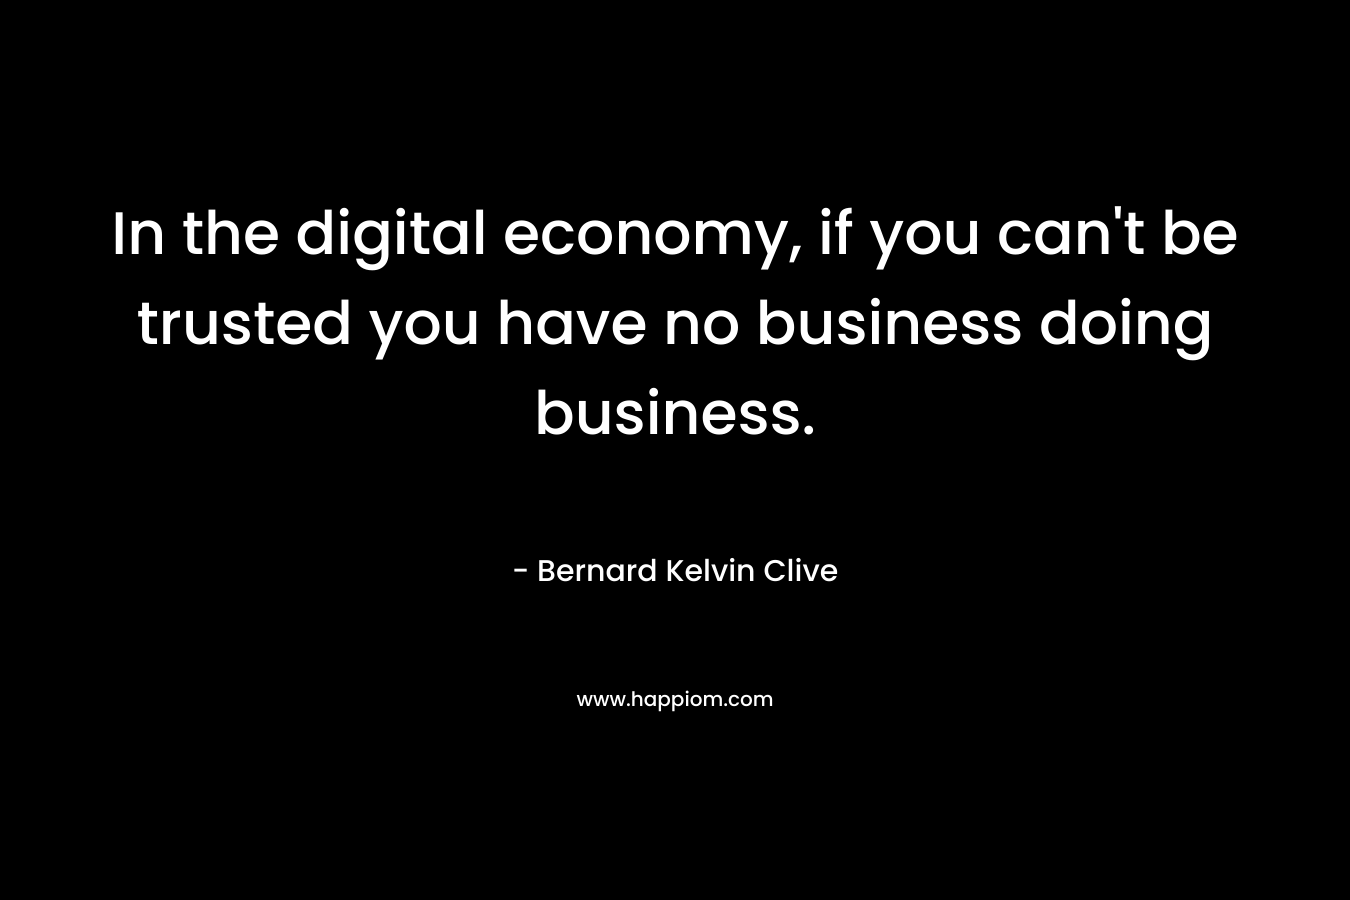 In the digital economy, if you can't be trusted you have no business doing business.